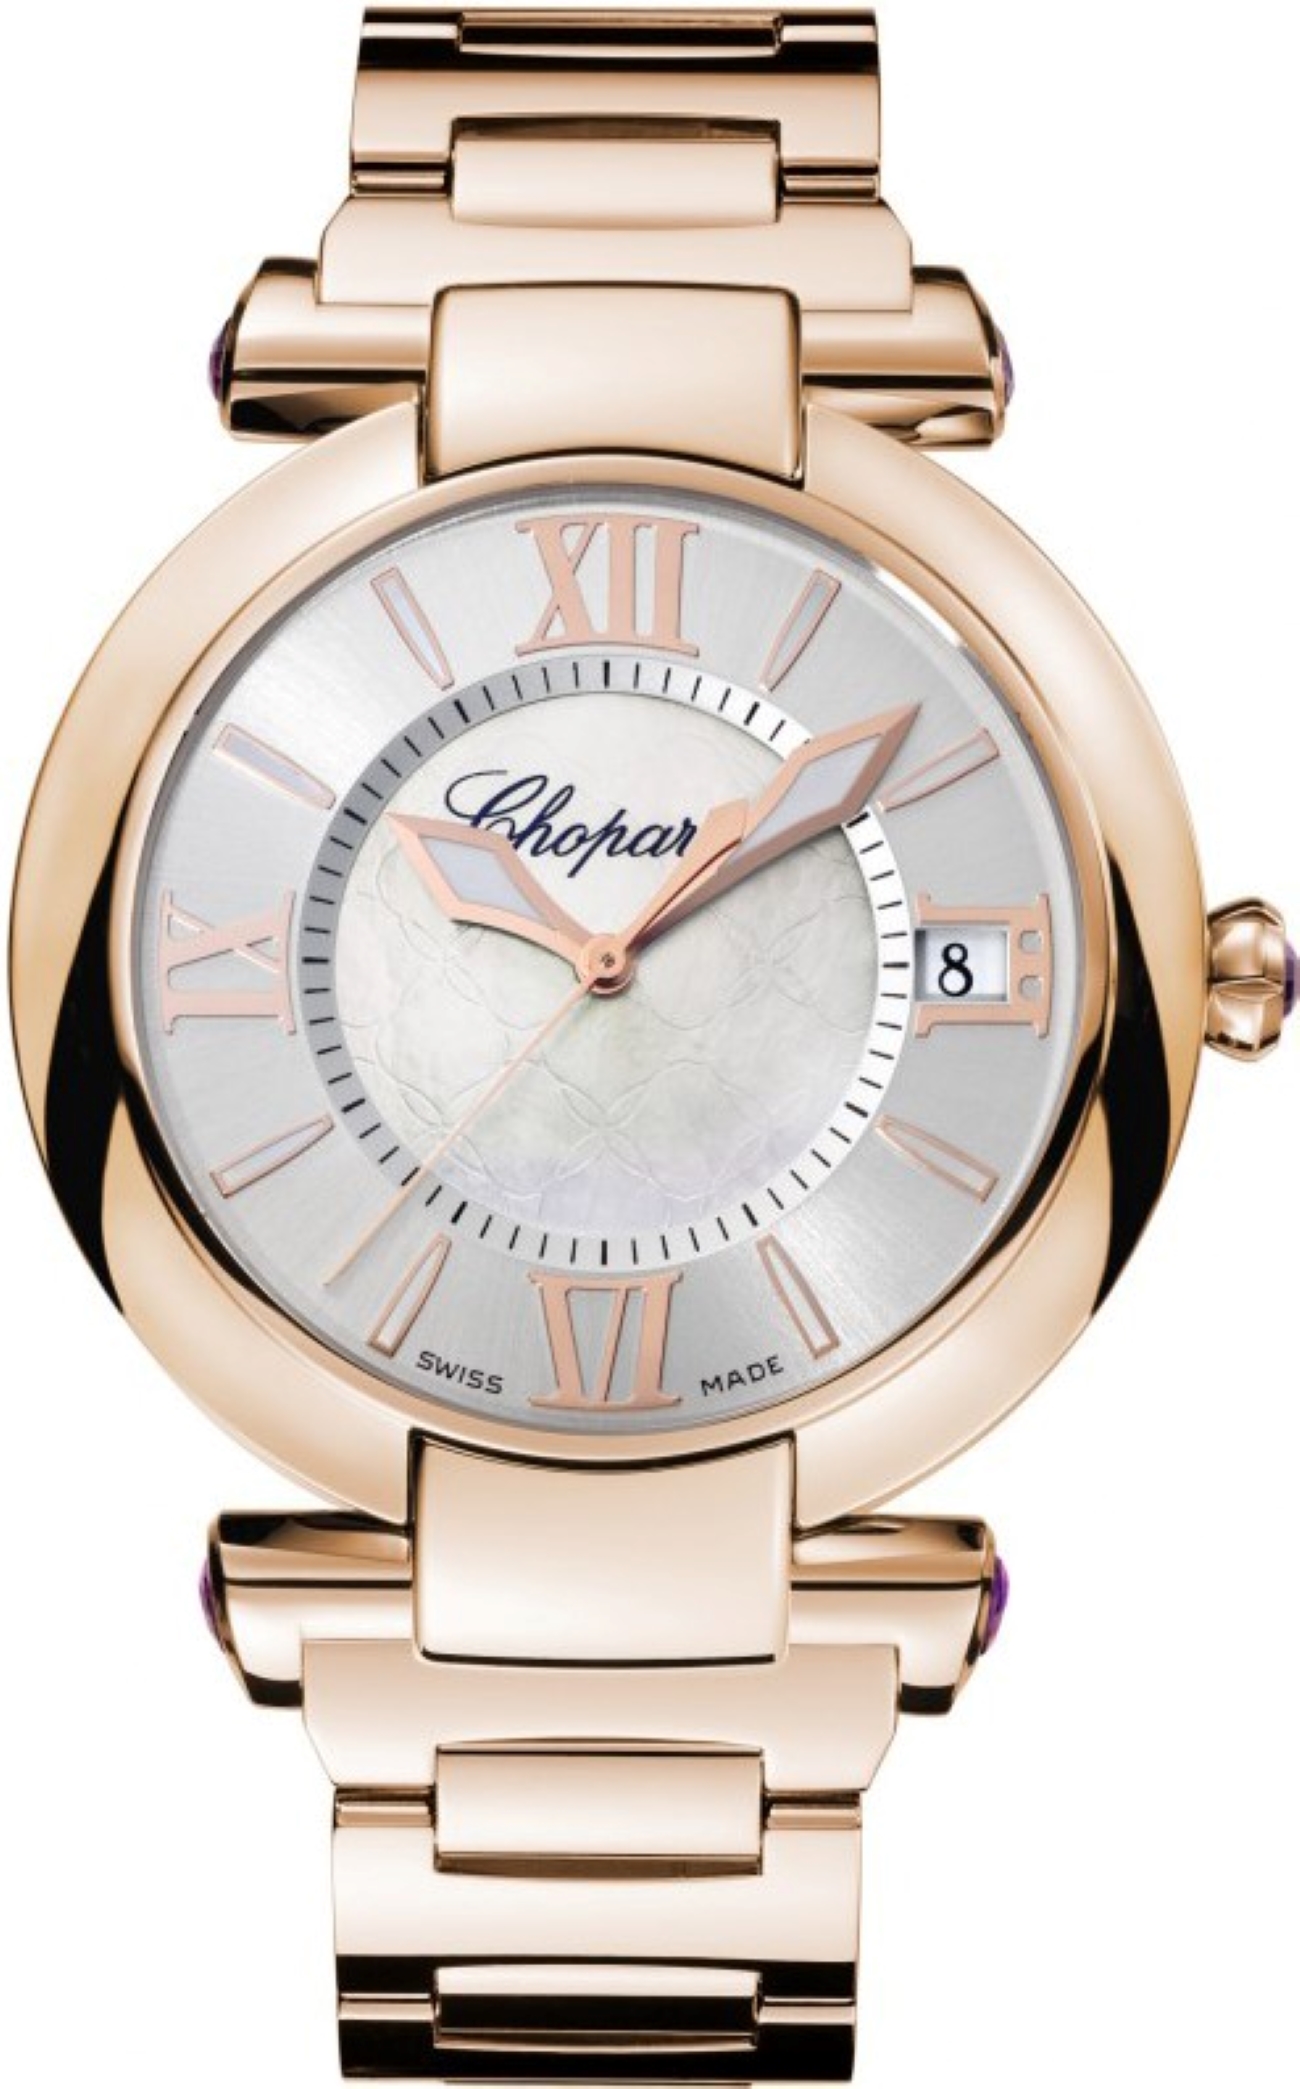 CHOPARD IMPERIALE 40MM ROSE GOLD MOP DIAL AUTOMATIC REF: 384241-5002